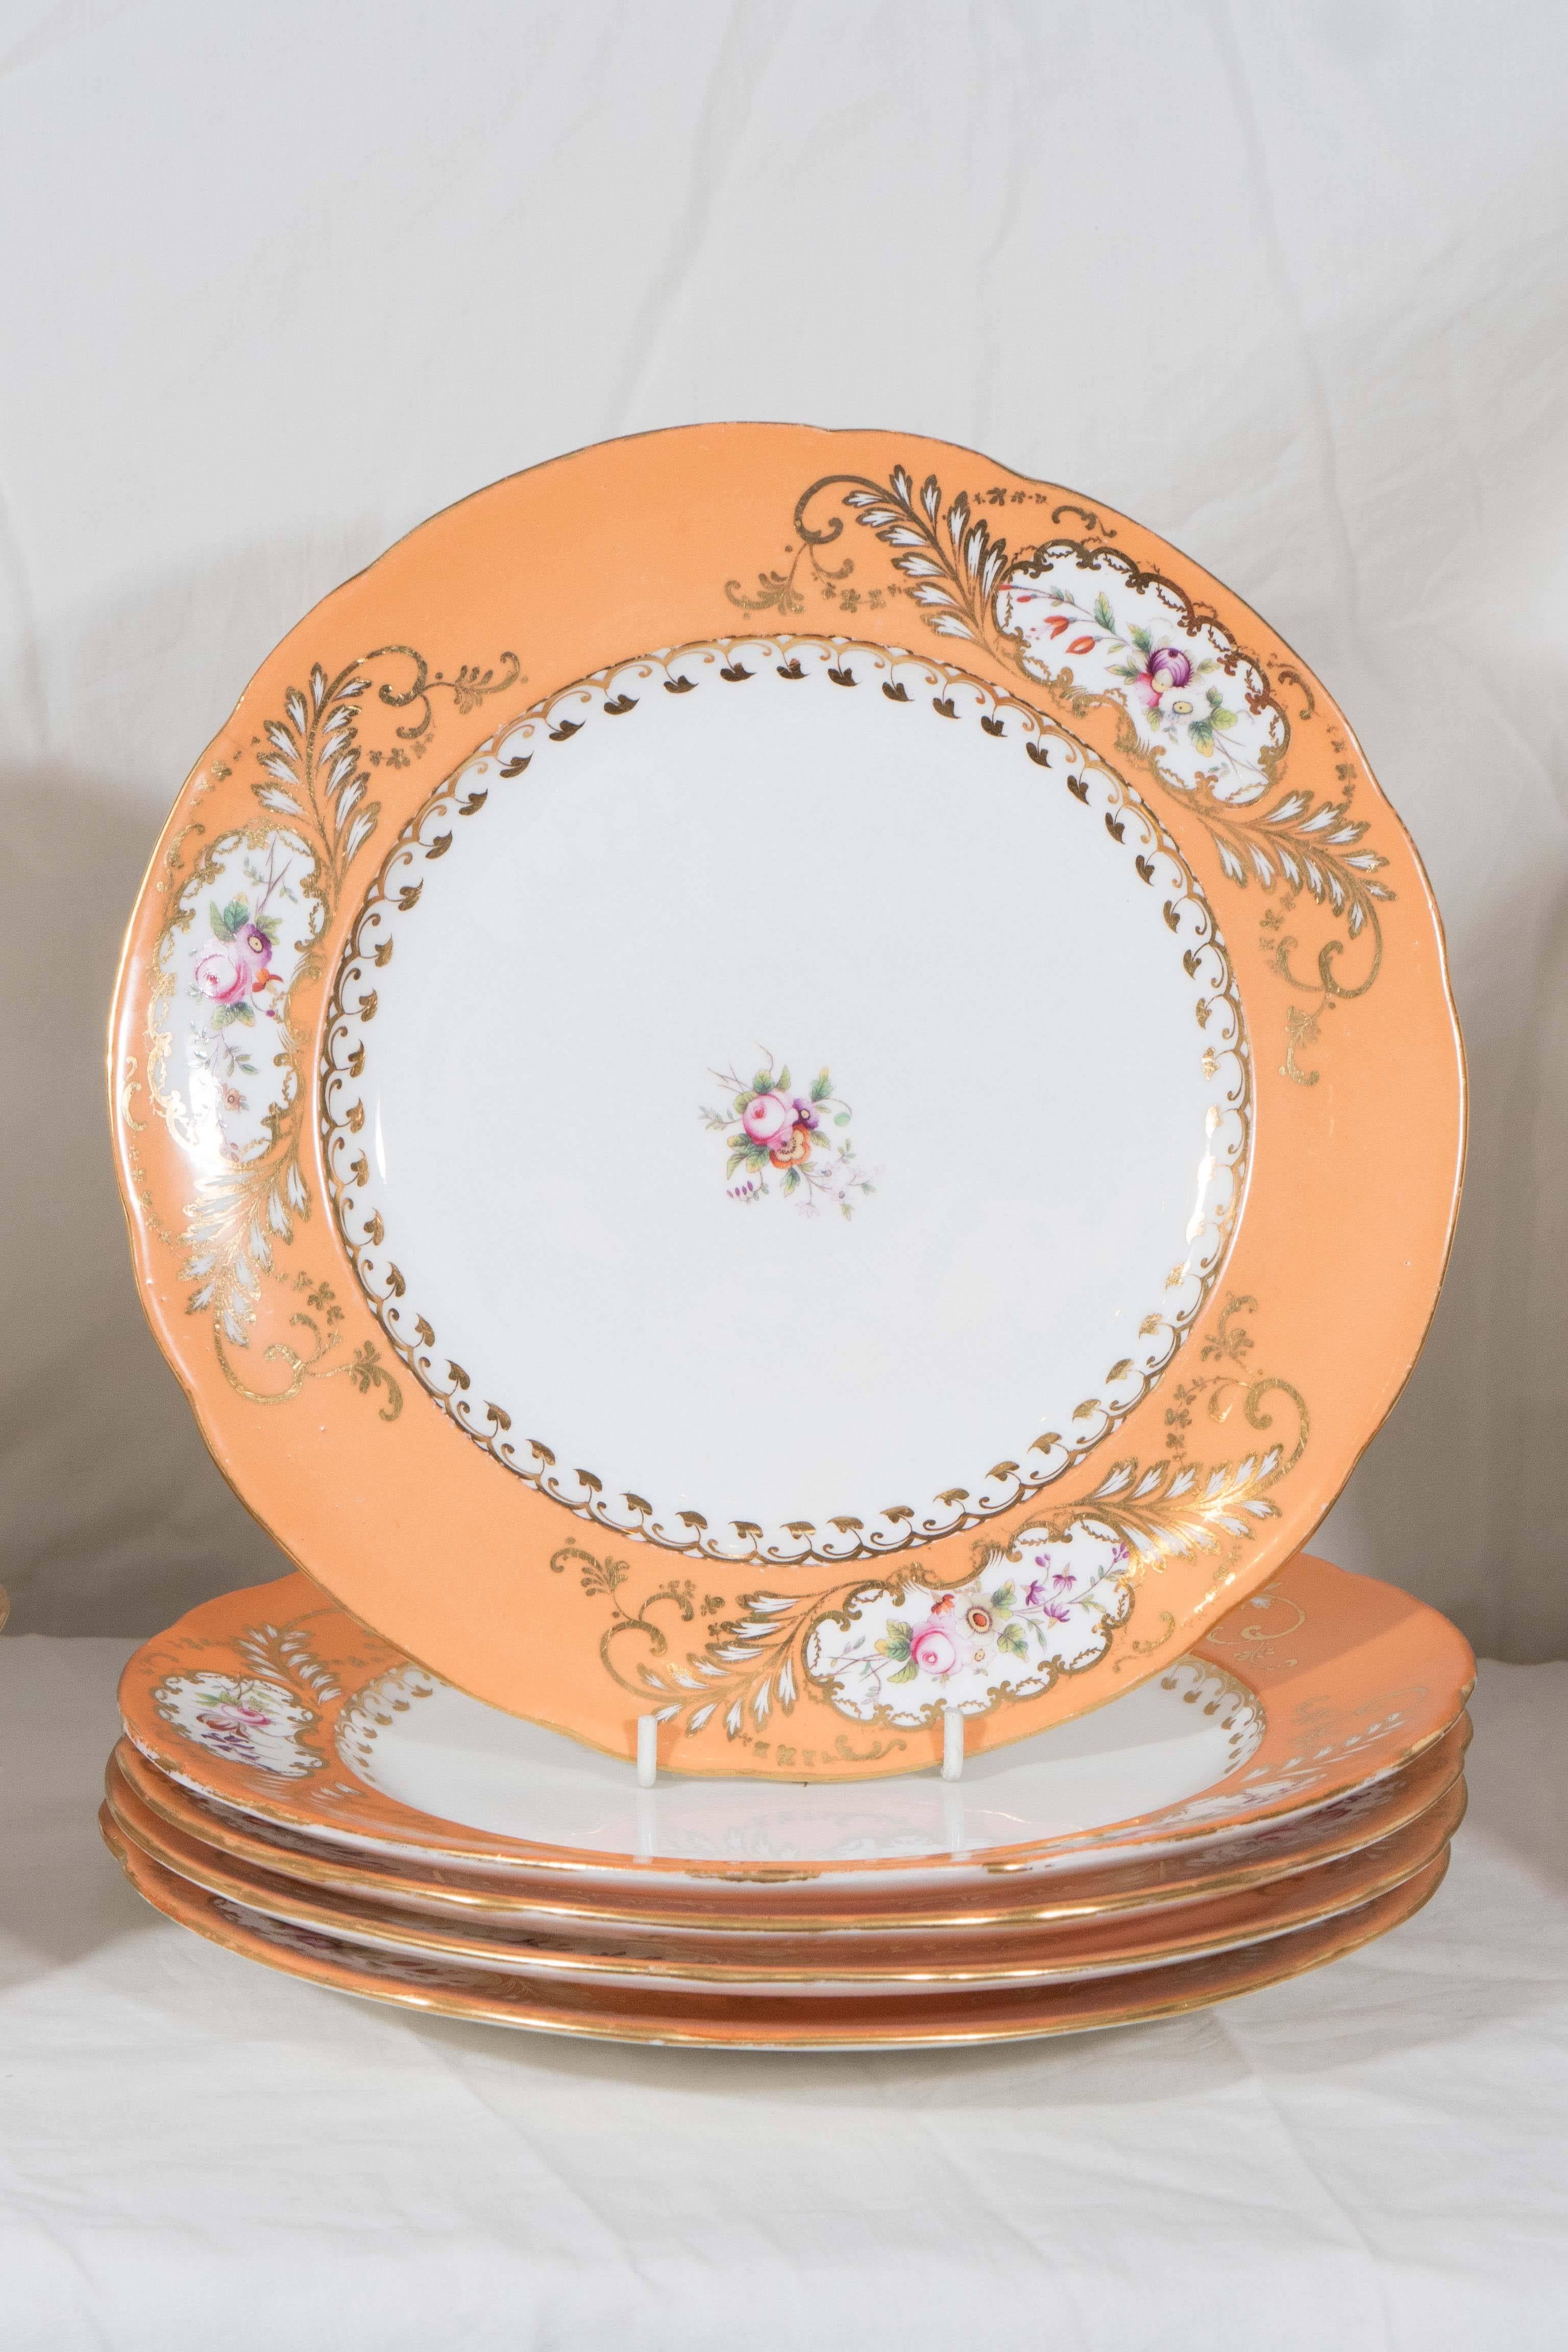 Victorian Antique English Porcelain Dishes with Wide Orange Borders